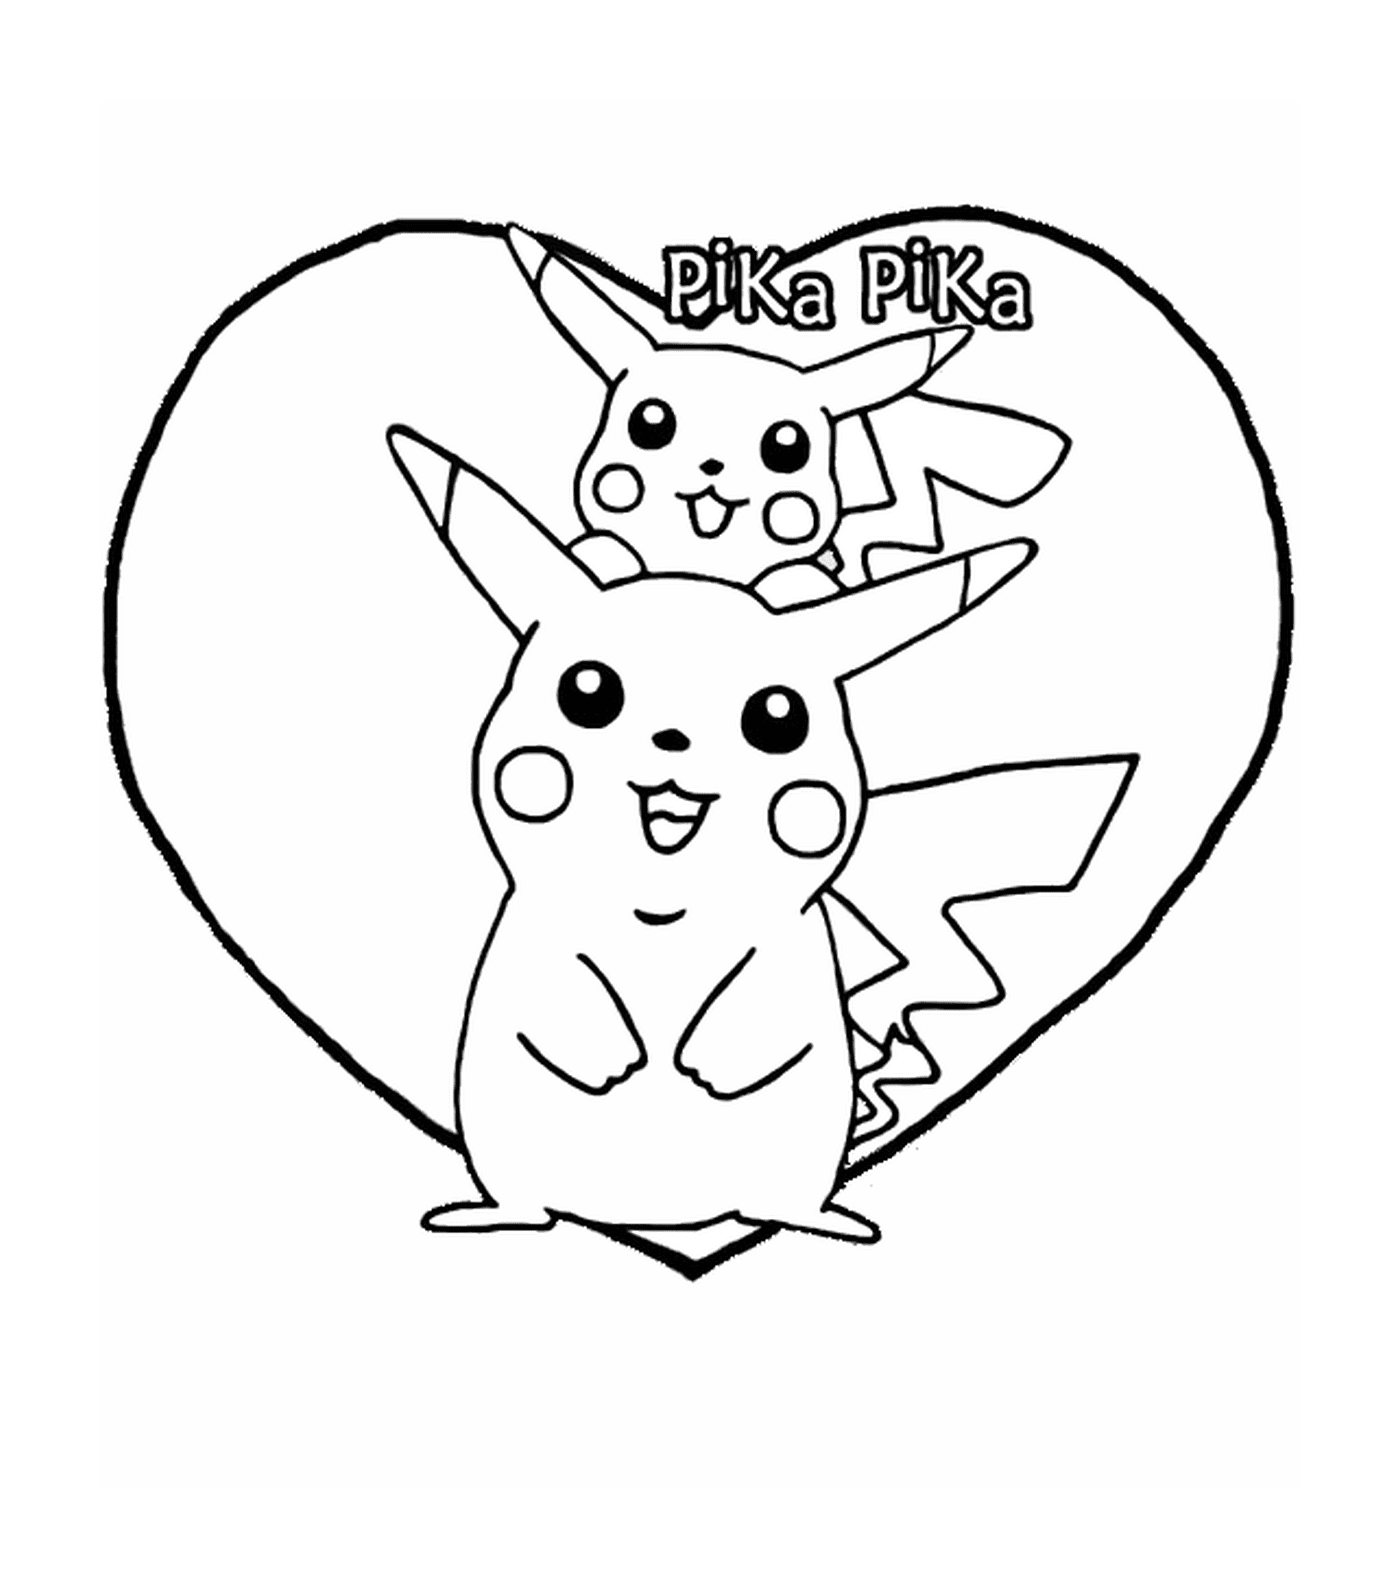  Pikachu and Pika in a heart 